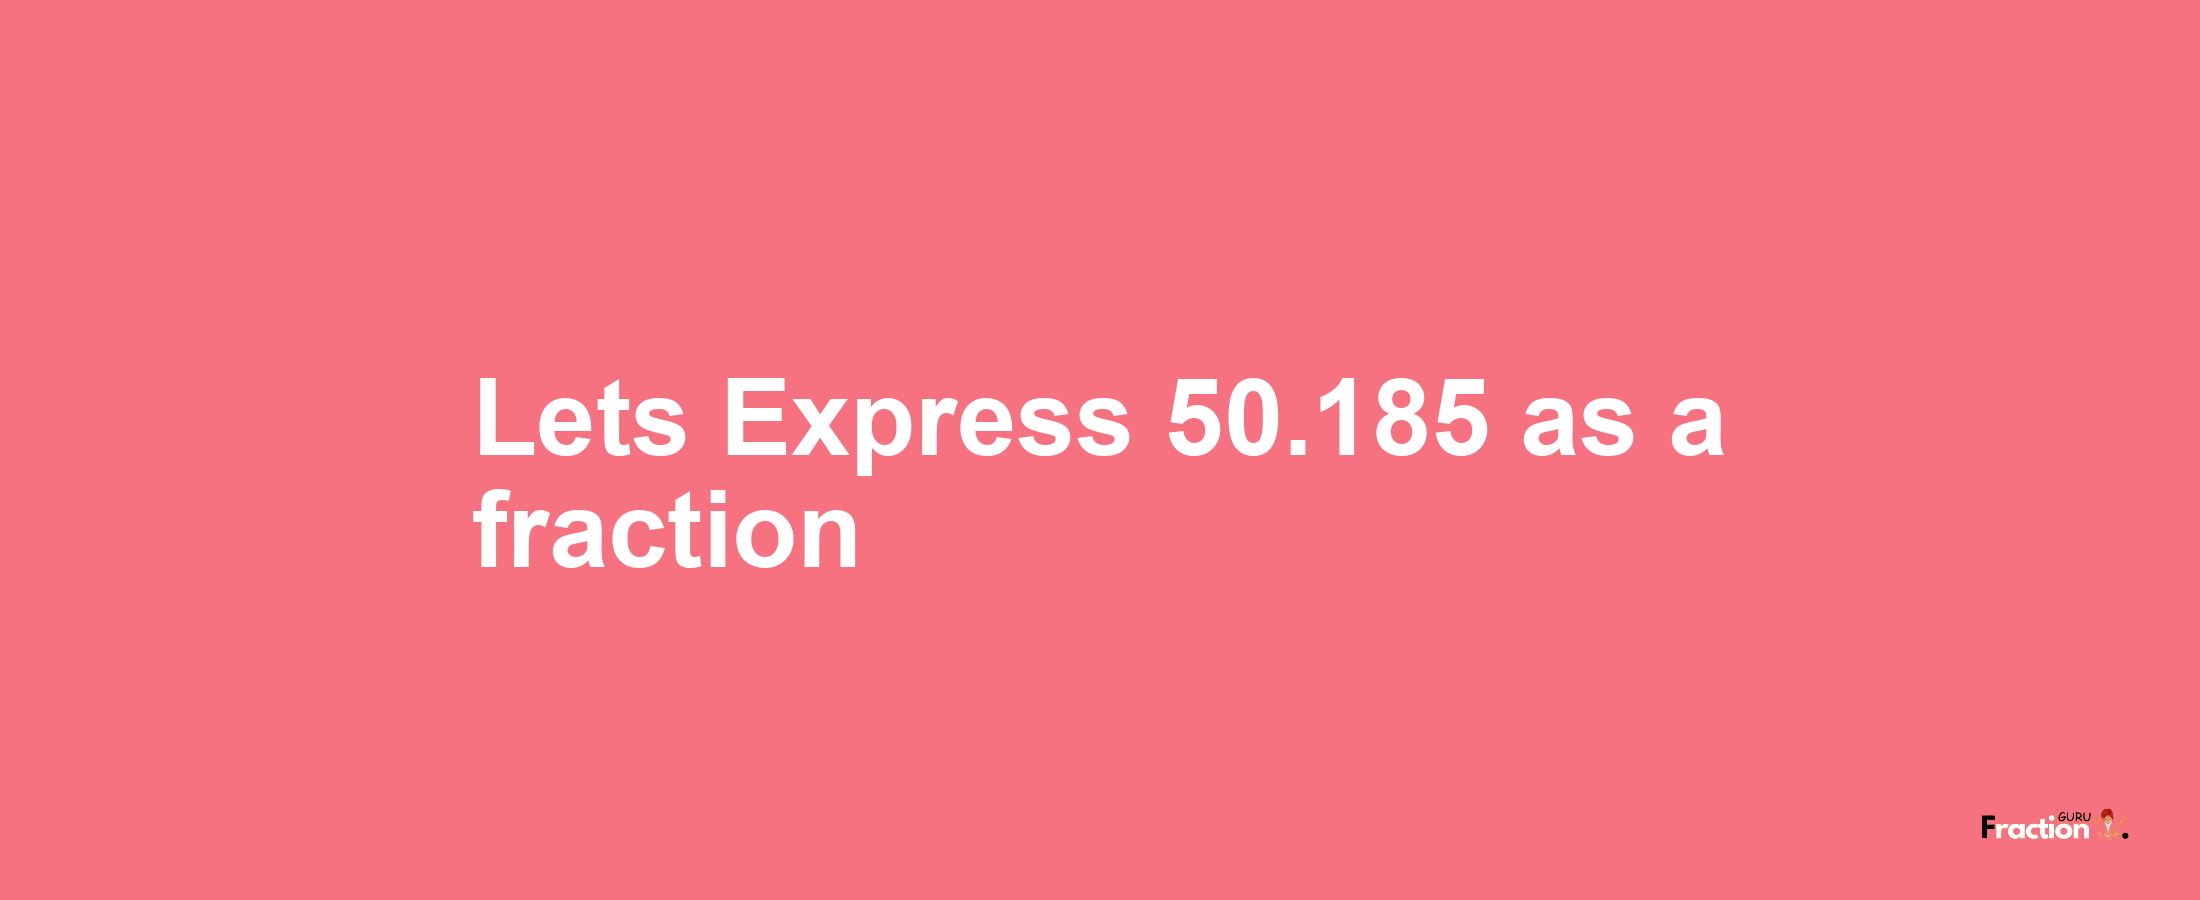 Lets Express 50.185 as afraction